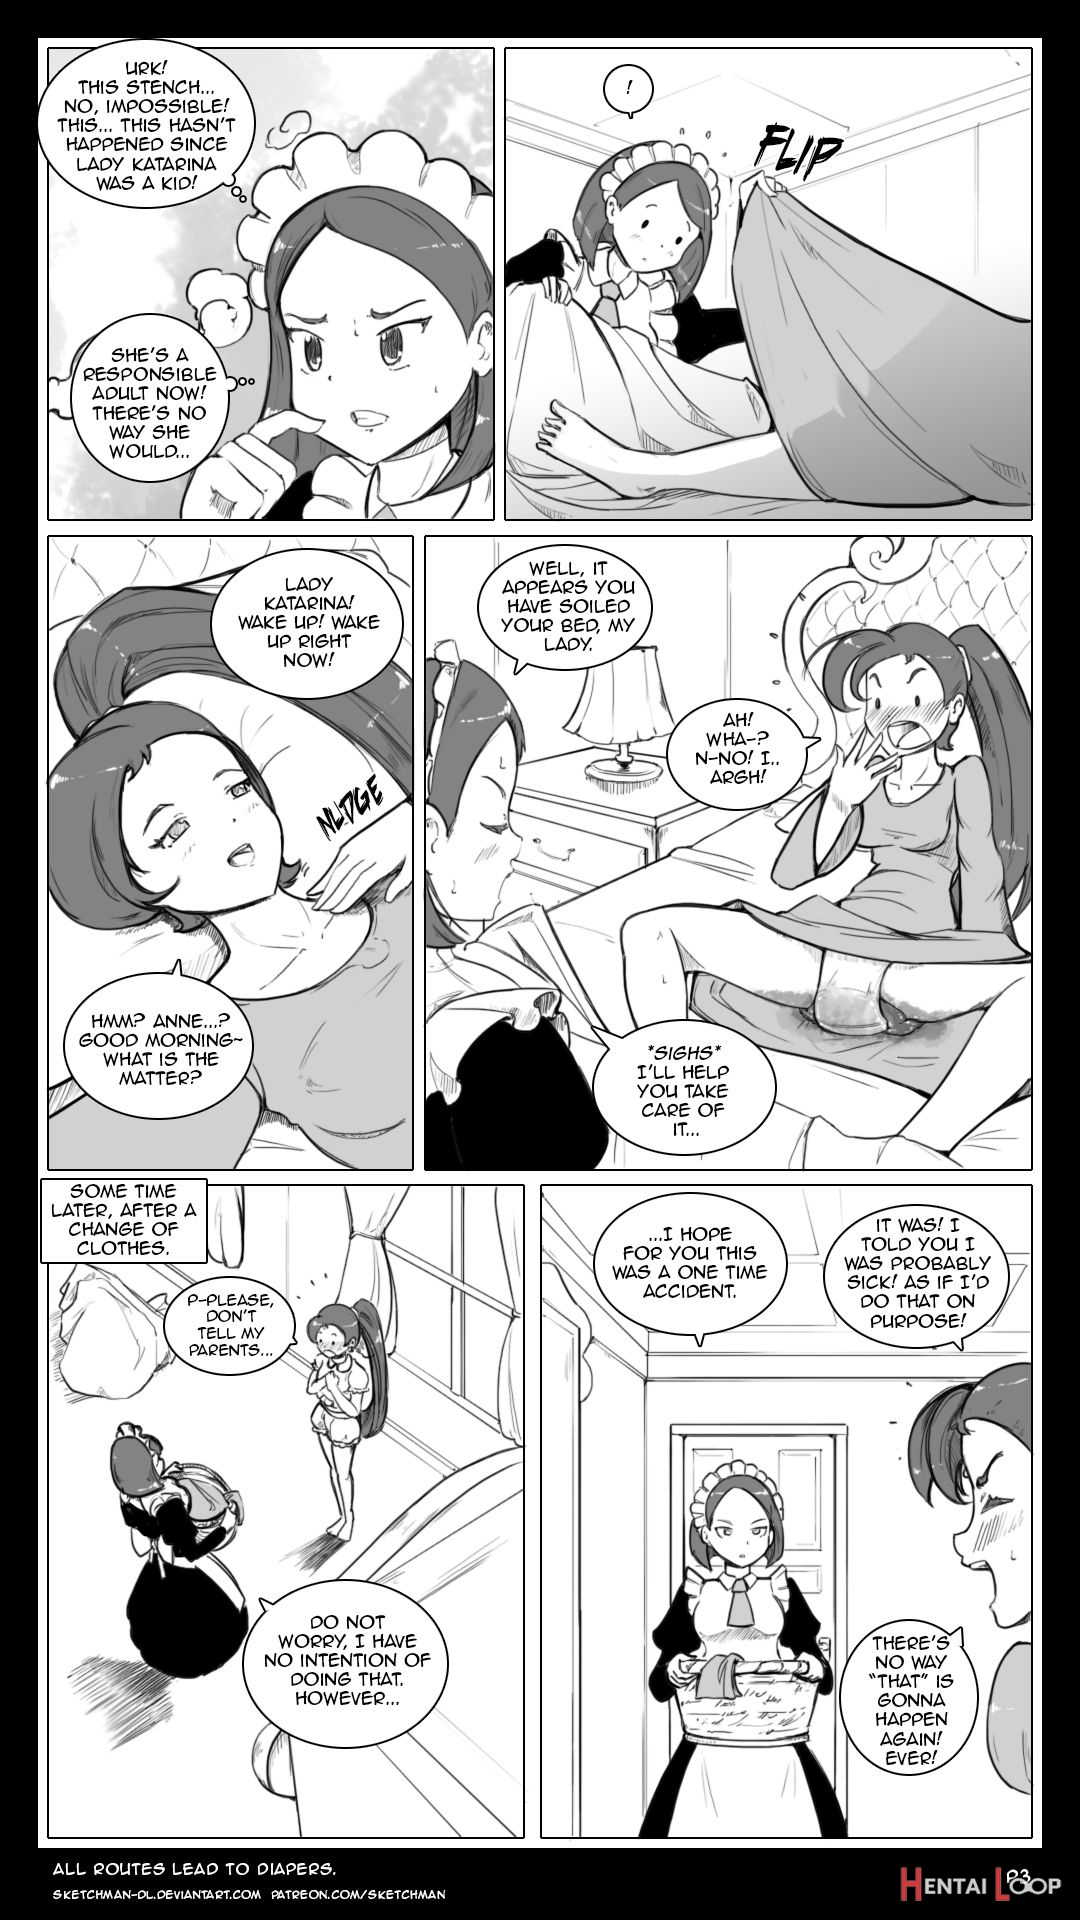 Allroutesleadtodiapers page 5